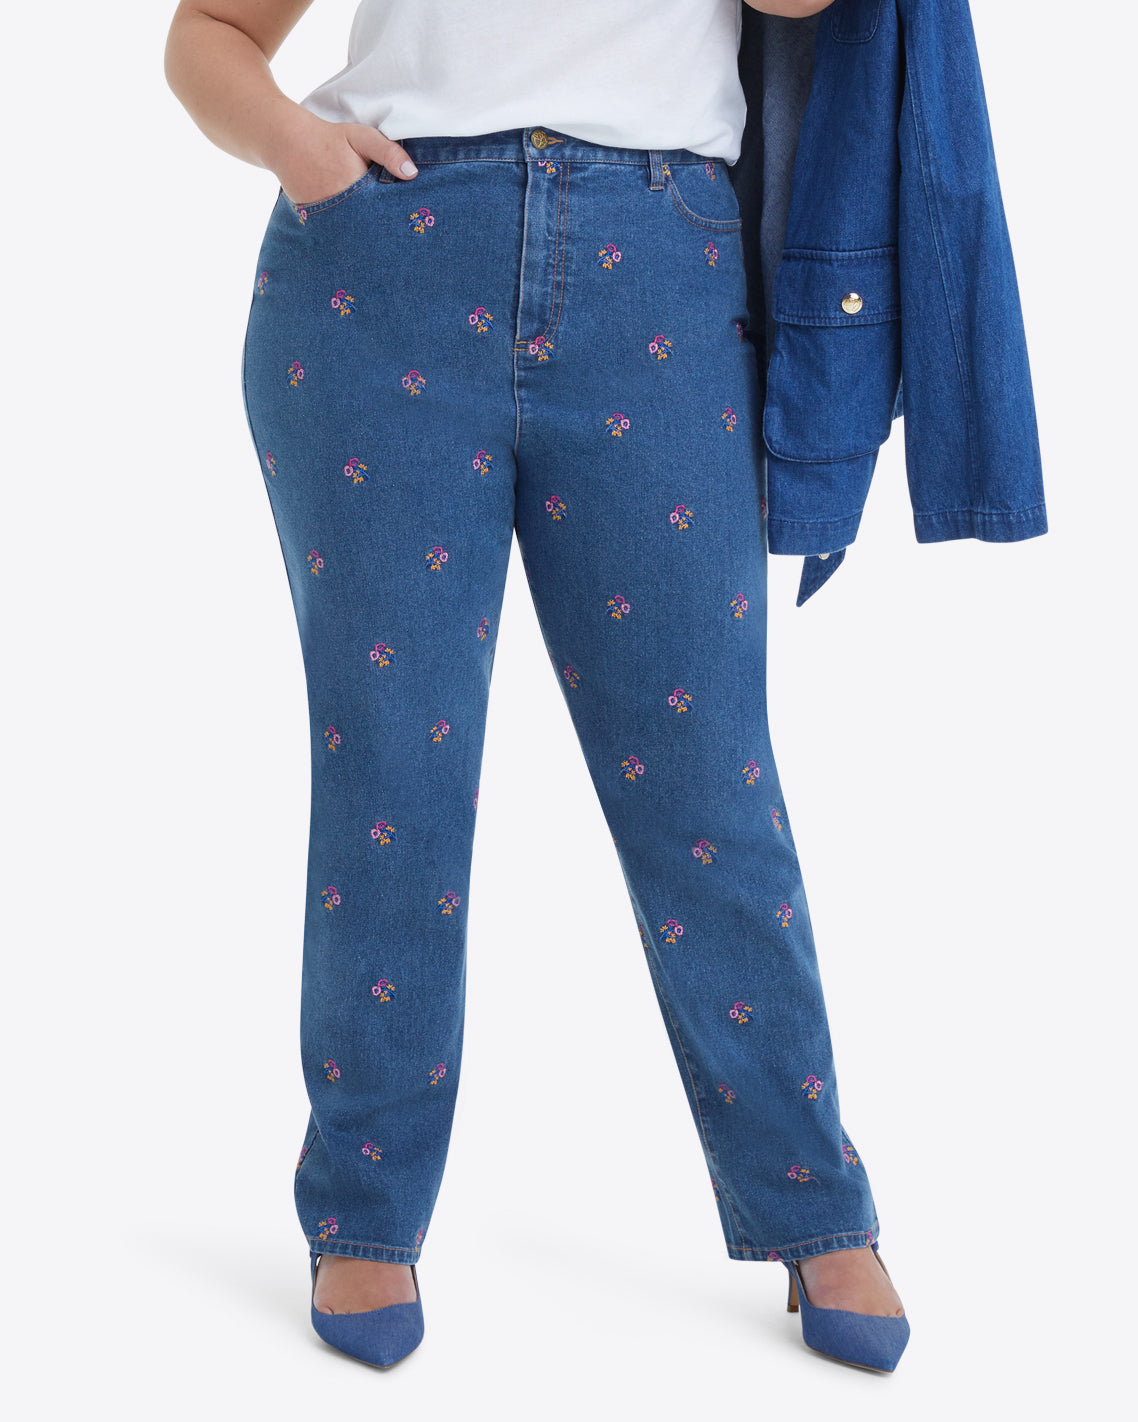 Draper James Kick Flare Jeans in Embroidered Posy